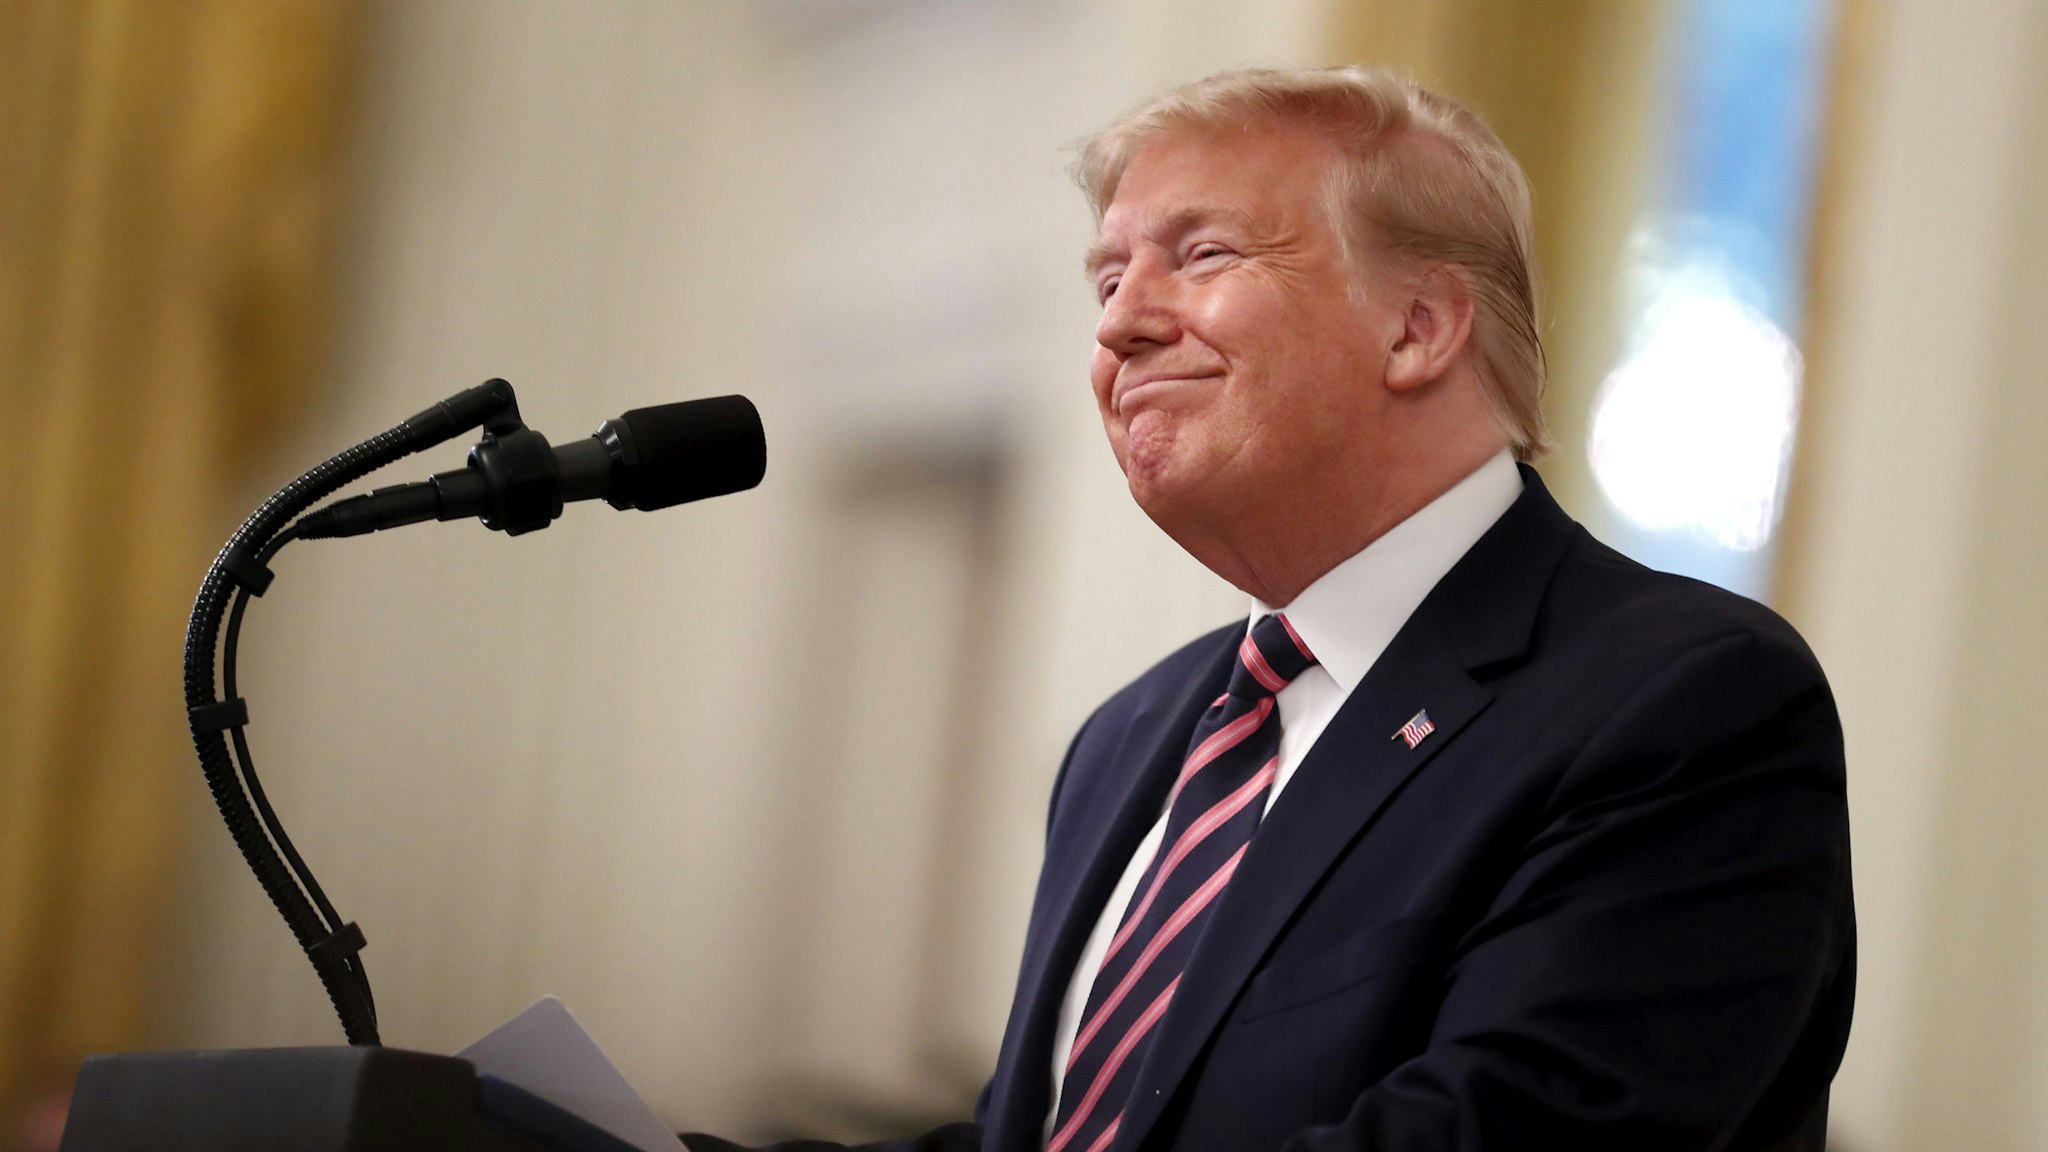 U.S. President Donald Trump smiles during an event at the White House in Washington, D.C., U.S., on Thursday, Feb. 6, 2020. Trump's acquittal by the Senate delivered an expected yet exhilarating victory to the White House, freeing a president who has for years operated under the threat of impeachment and longed for vindication.